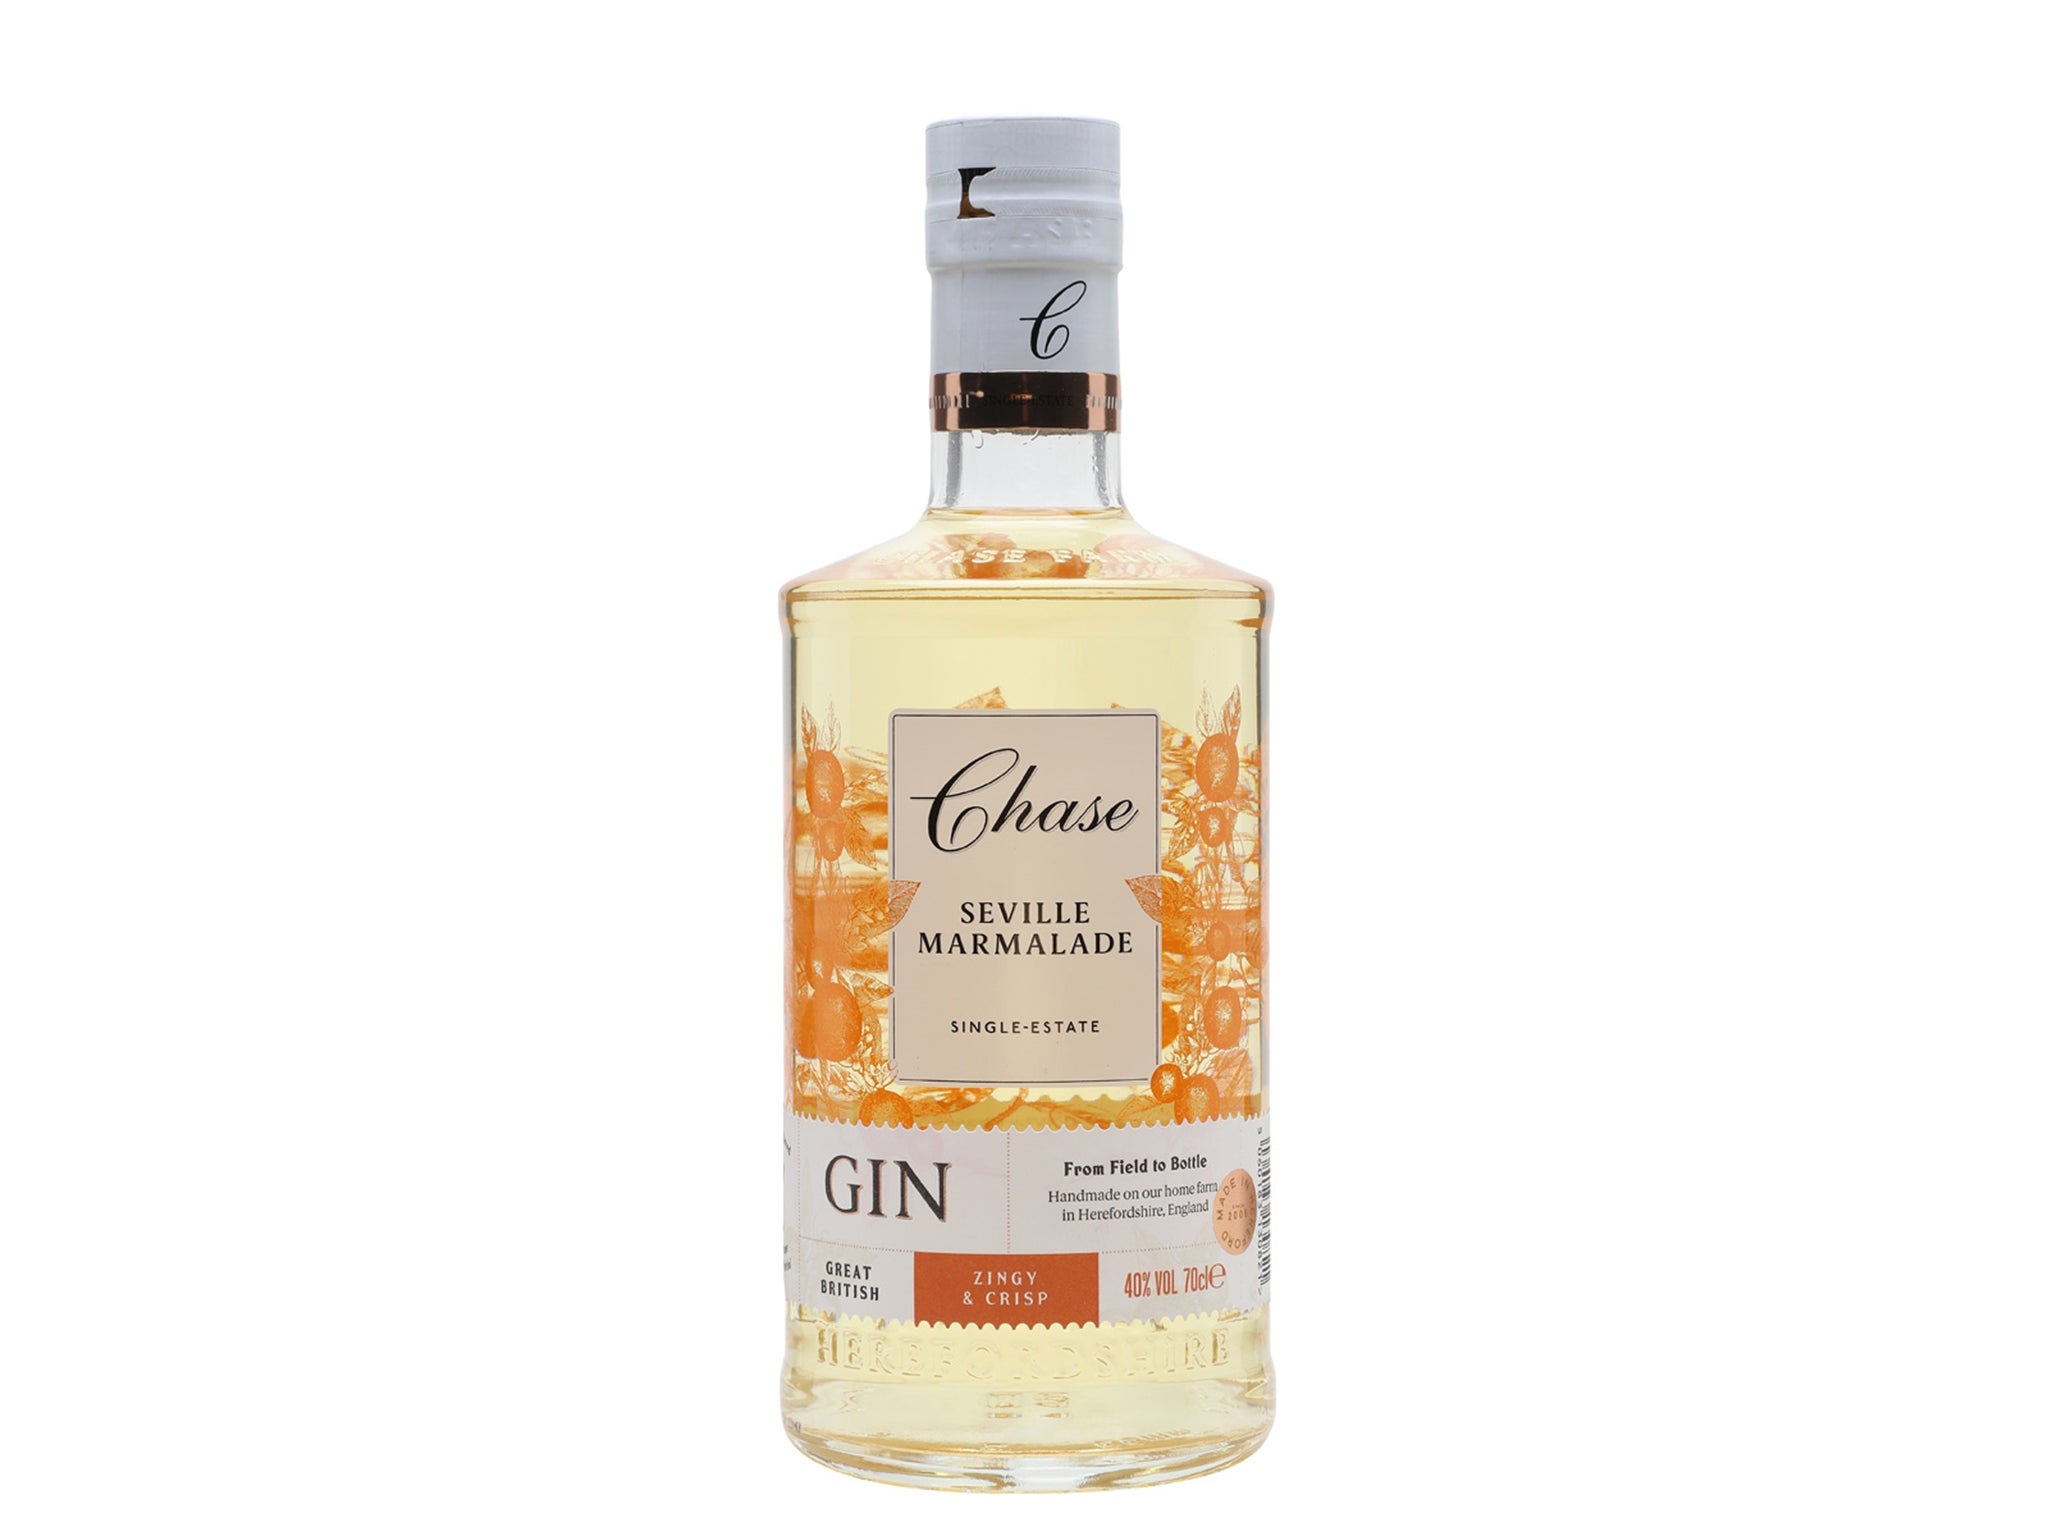 Forget spreading it on toast, it's all about the marmalade gin instead (Chase Distillery)